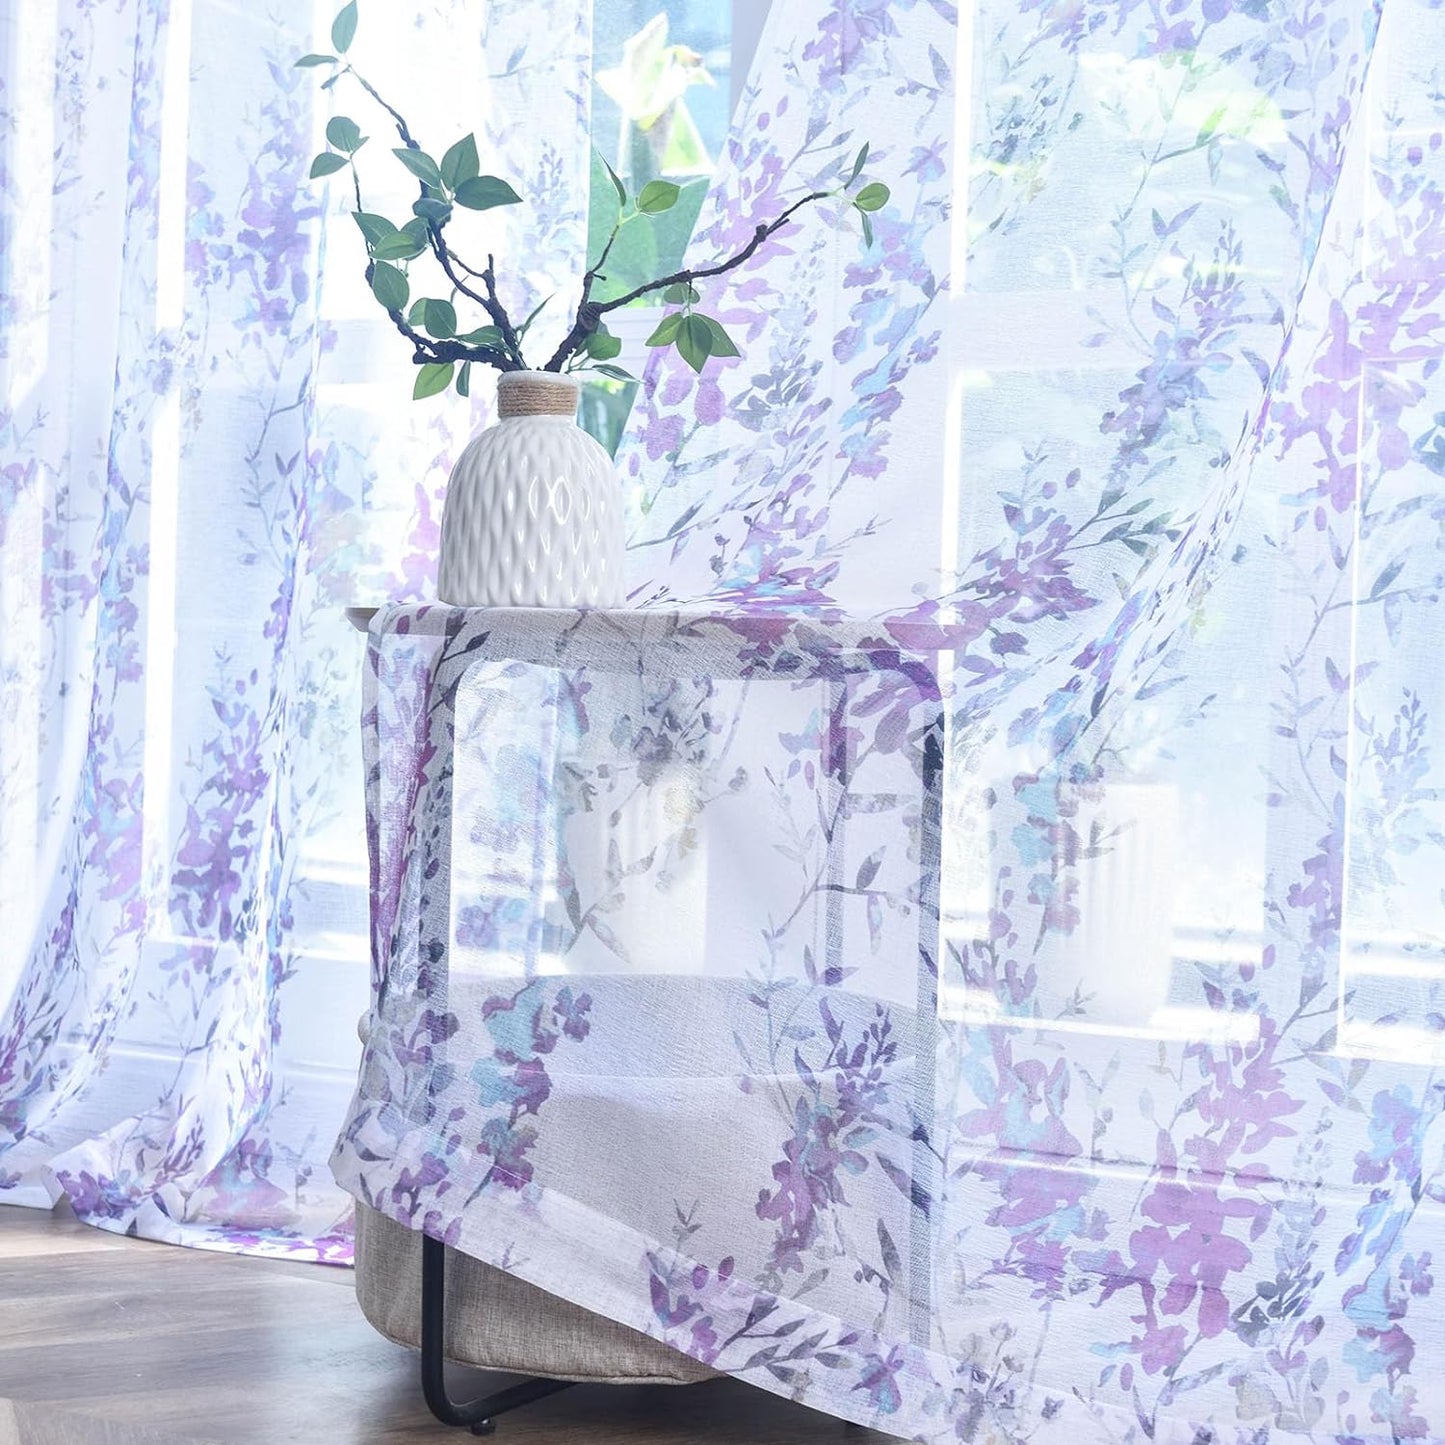 Kotile Grey White Sheer Curtains, Classic Vintage Branch Leaf Printed Sheer Curtains 63 Inch Length 2 Panels Set, Privacy Rod Pocket Sheer Window Floral Curtains, 50 X 63 Inch, Grey  Kotile Textile Purple W50 X L63 Inch 